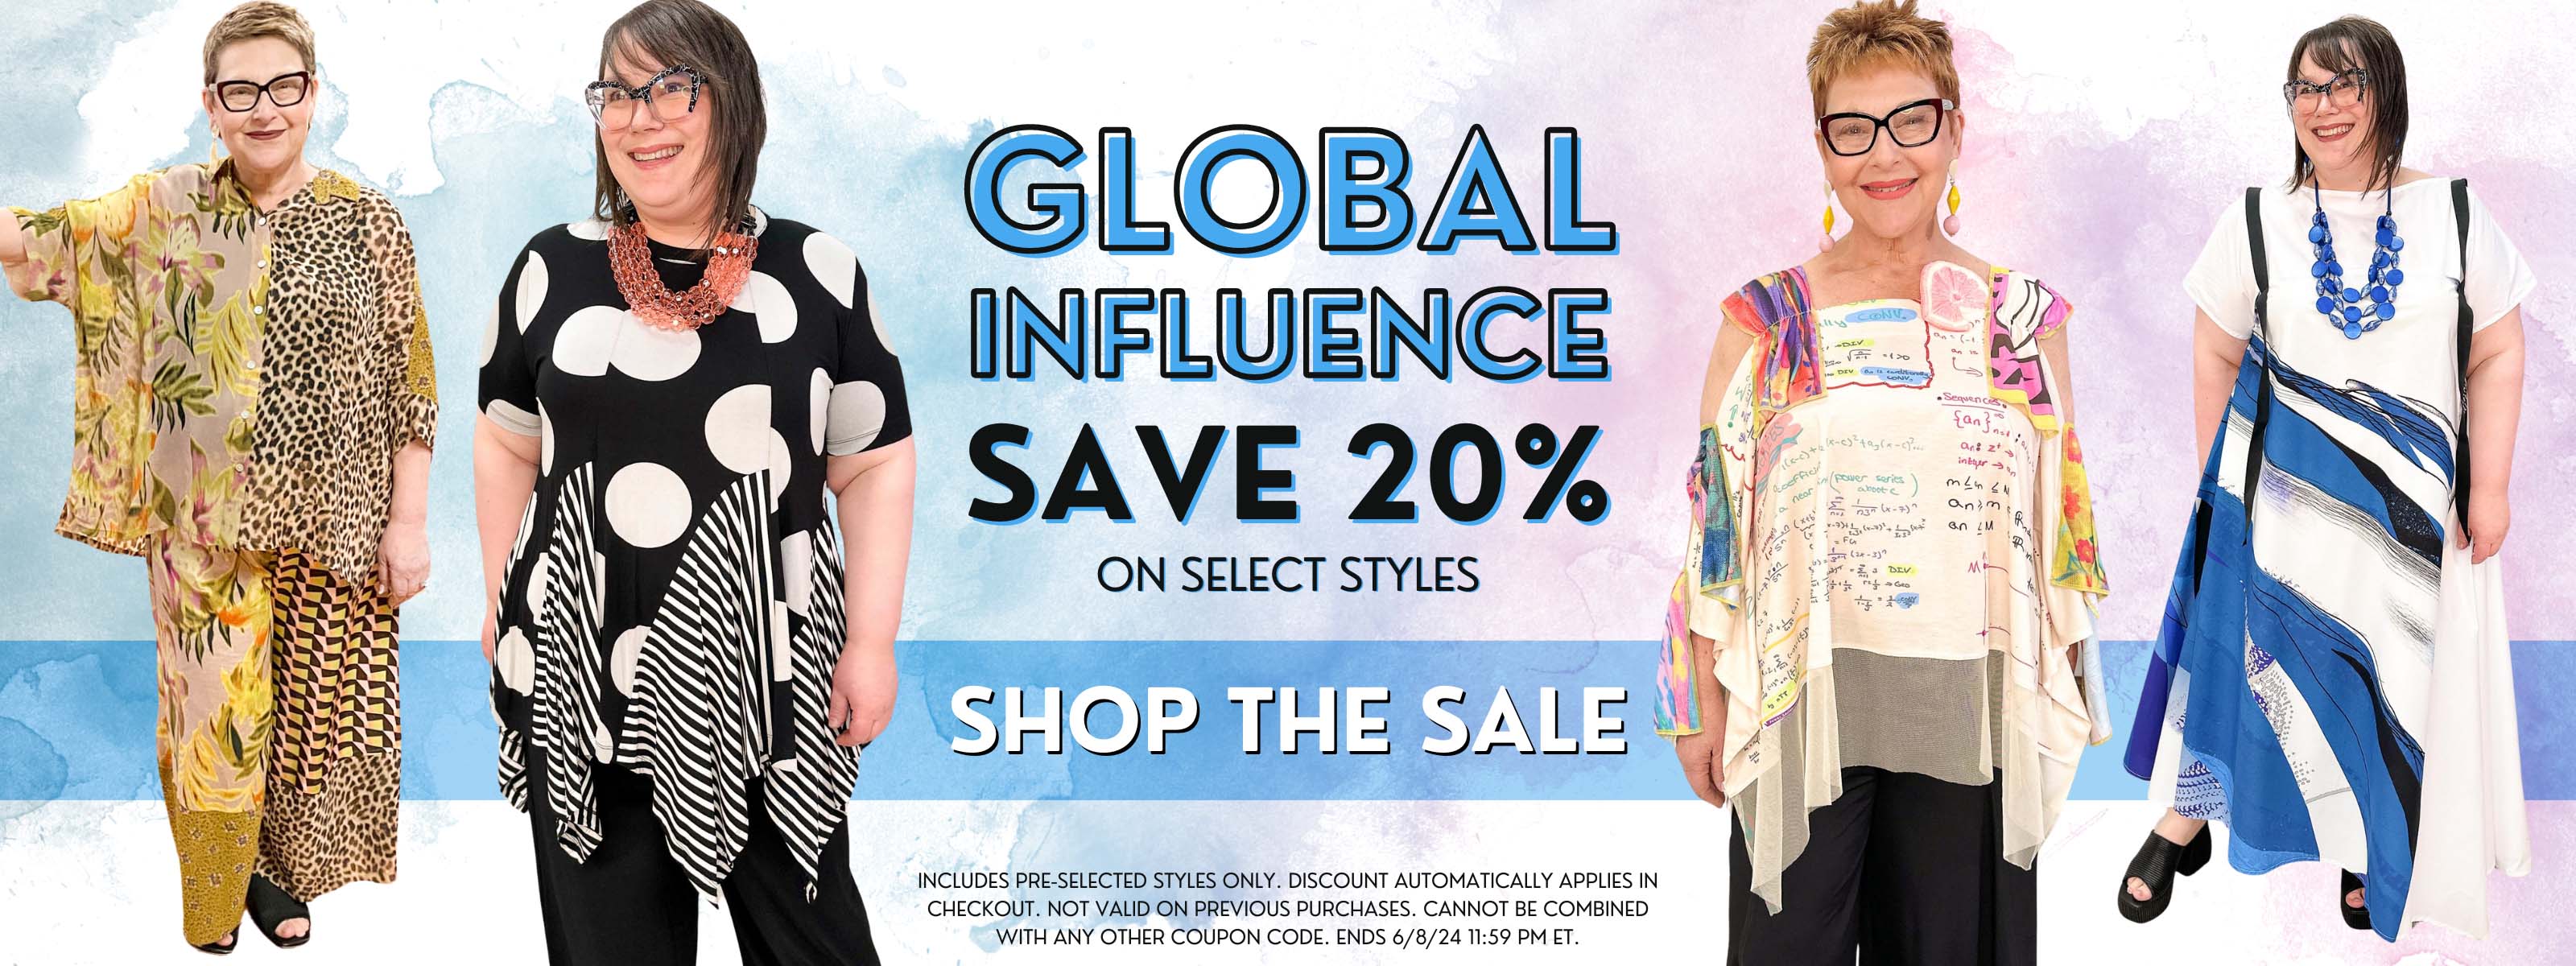 Global Influence Sale Save 20% Off Select Styles